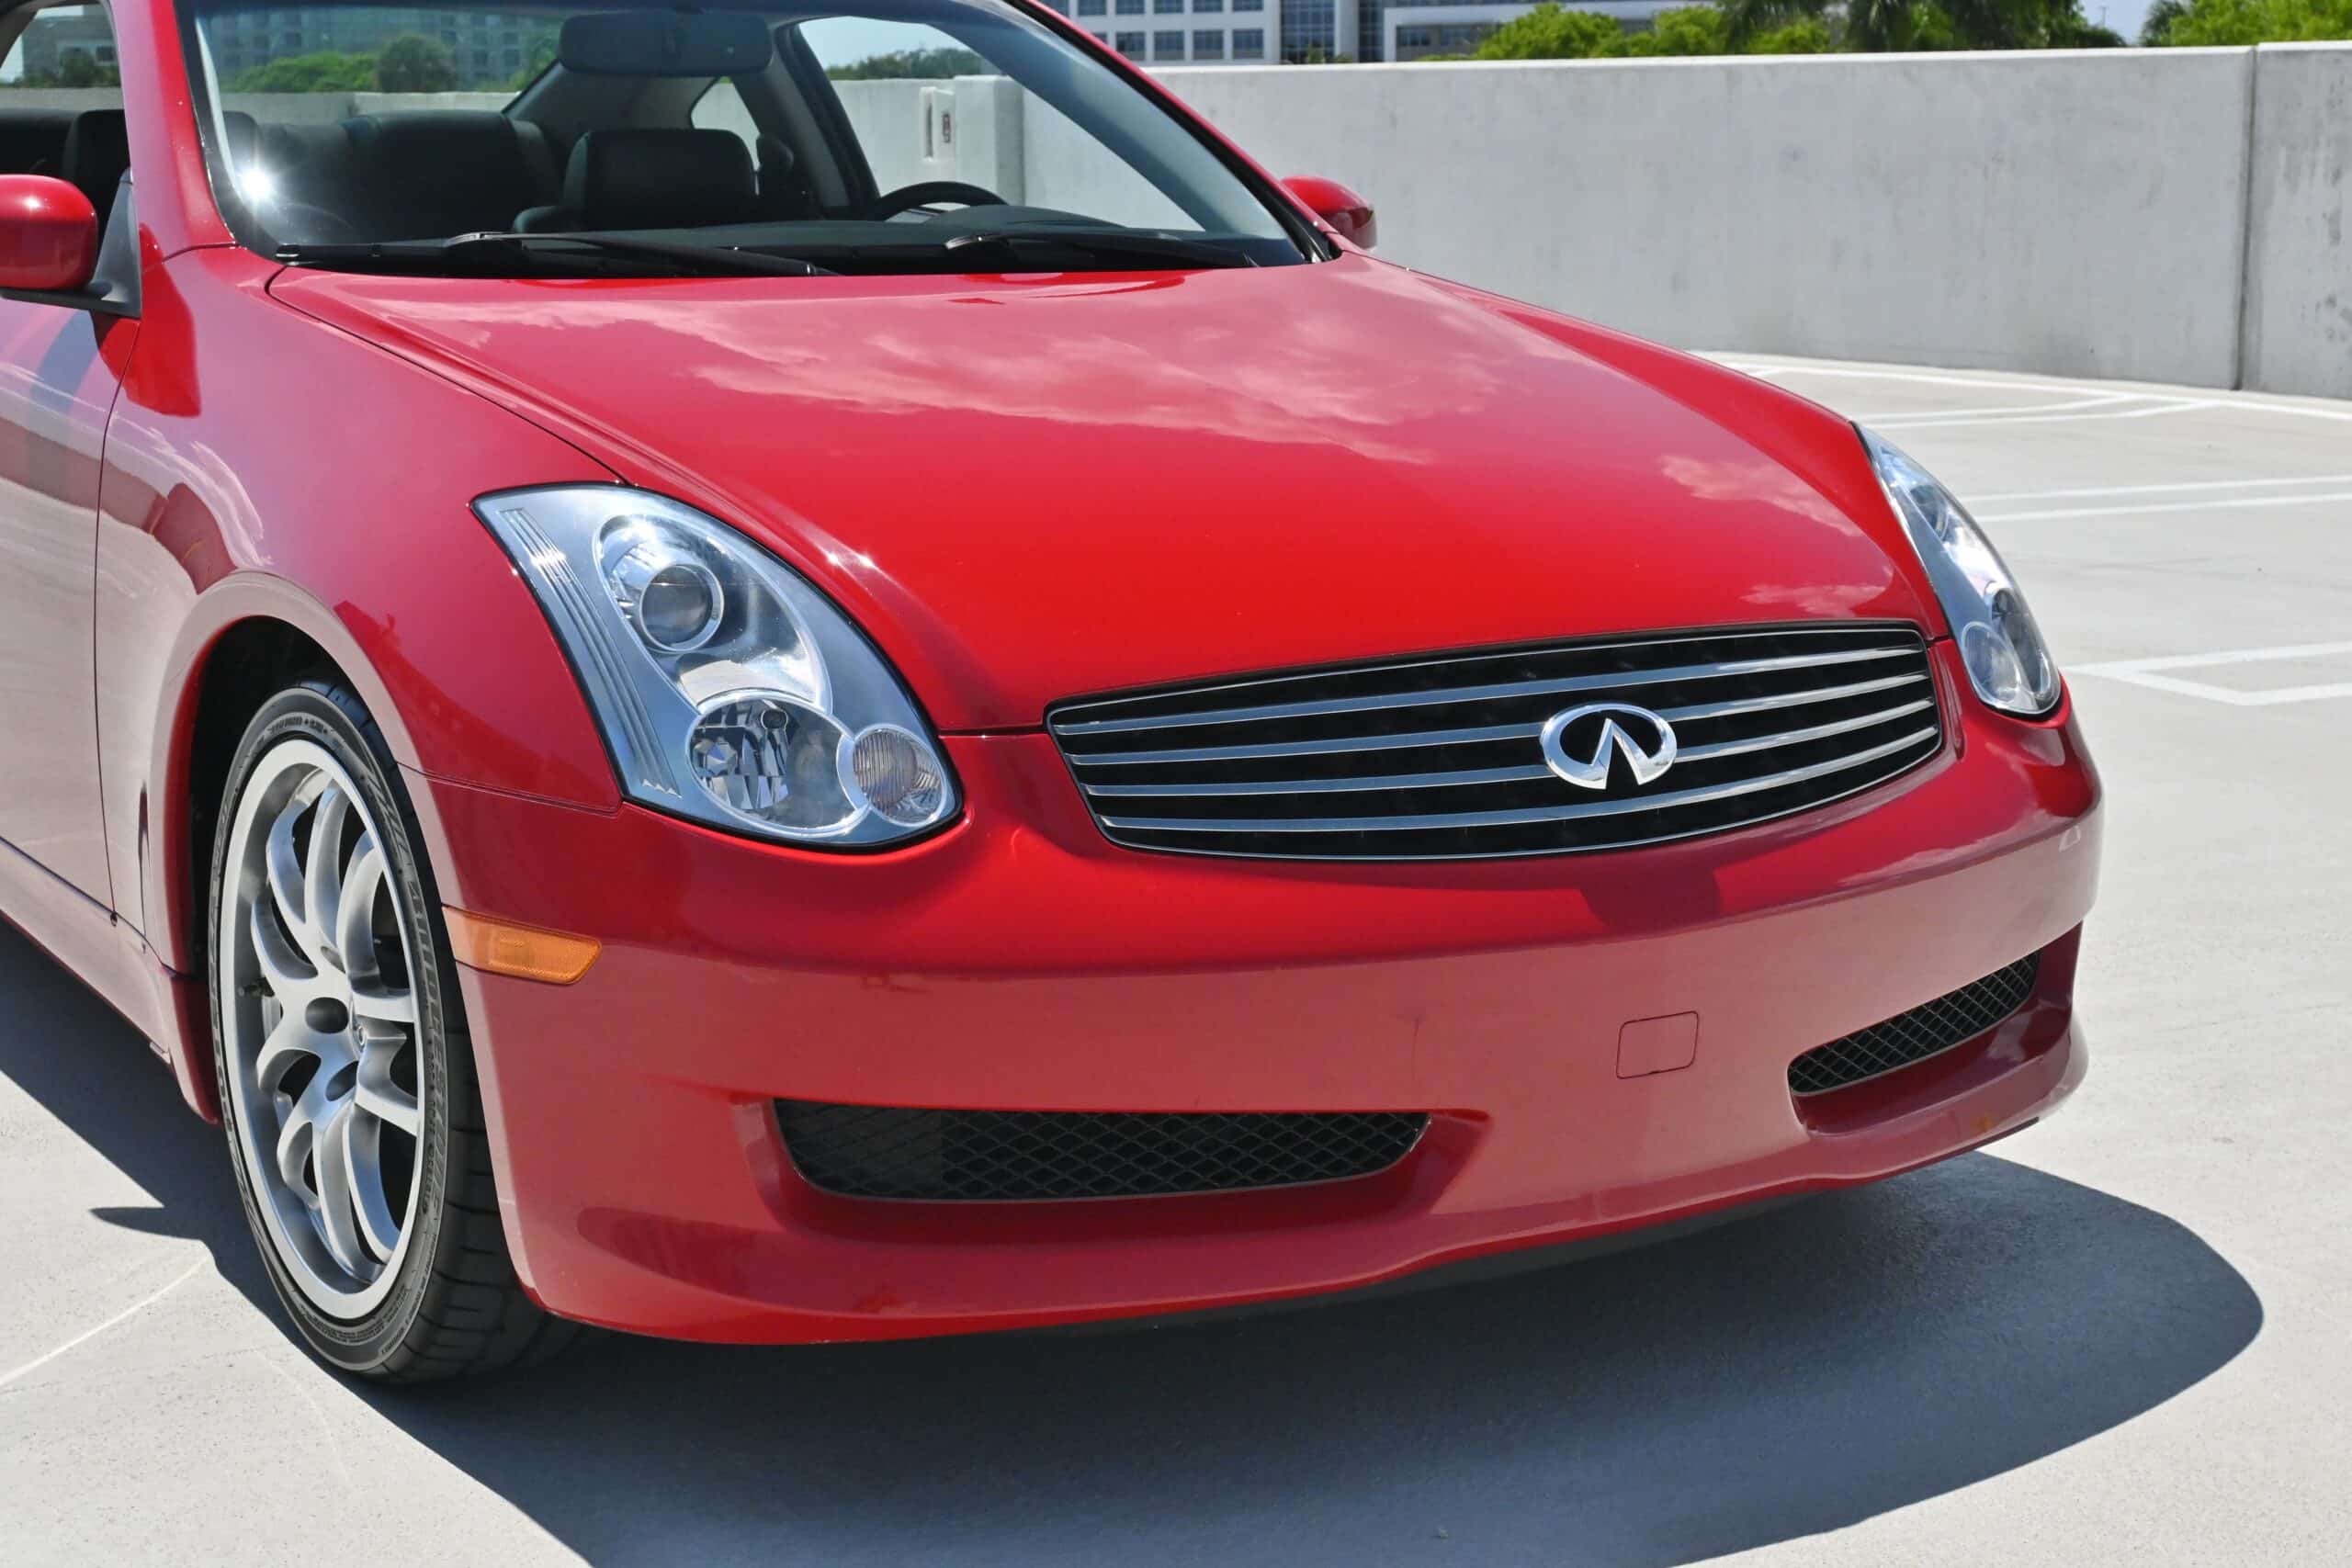 2007 Infiniti G35 6 Speed Only 32K Miles – Last Year G35 Coupe – No modifications – Showroom Condition